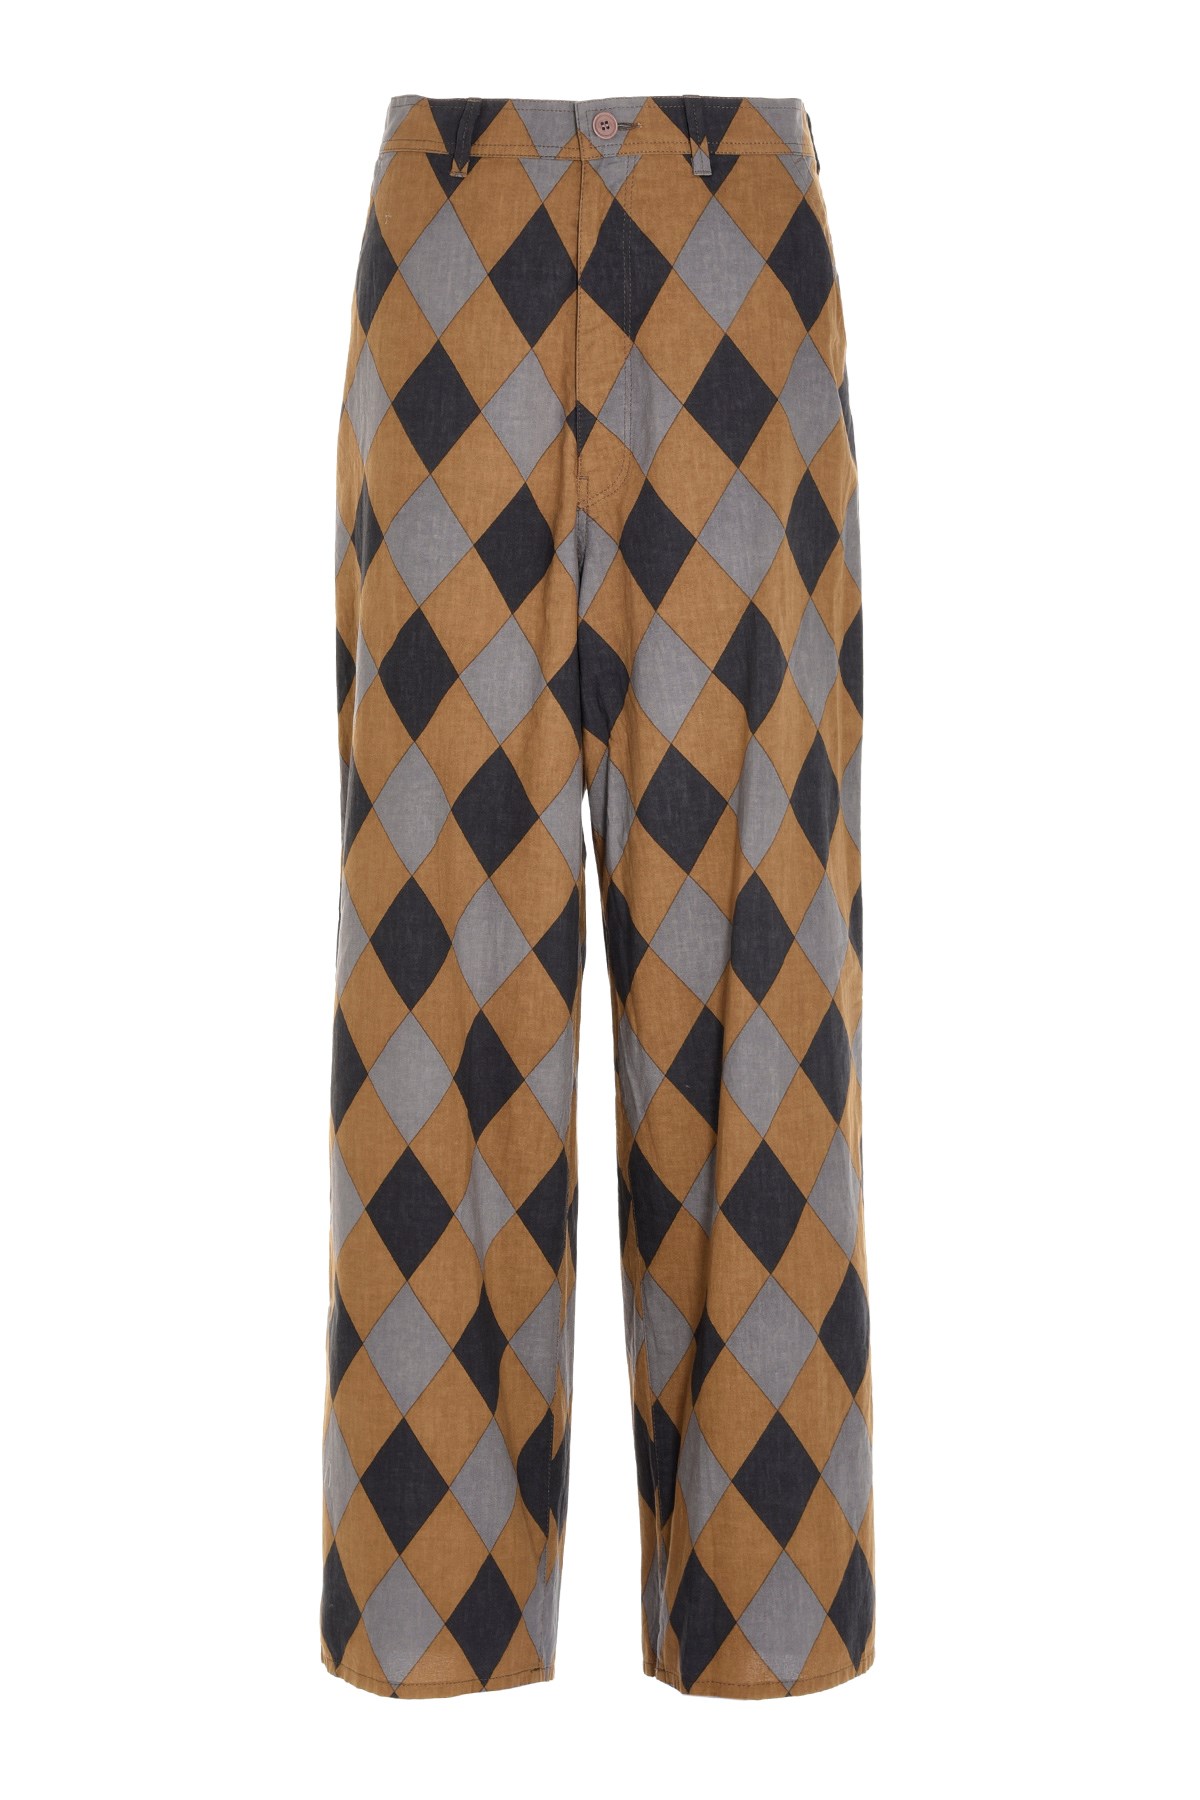 UNDERCOVER Checked Cotton Trousers